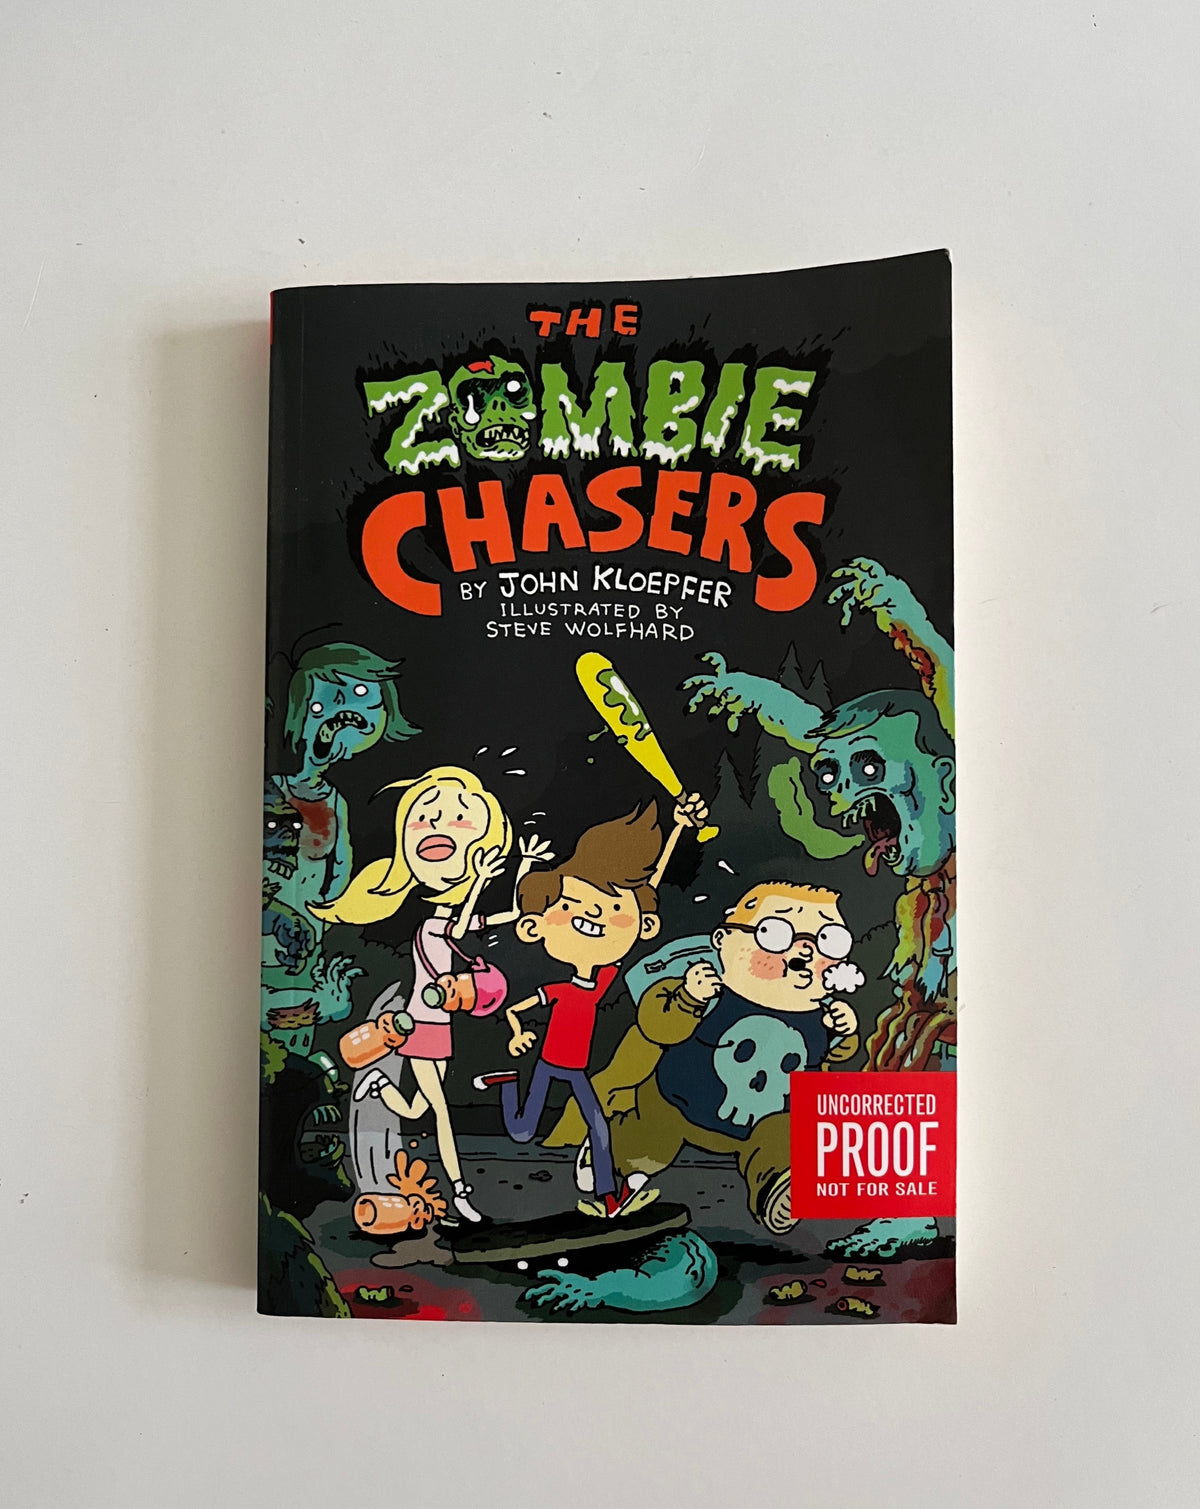 The Zombie Chasers by John Kloepfer